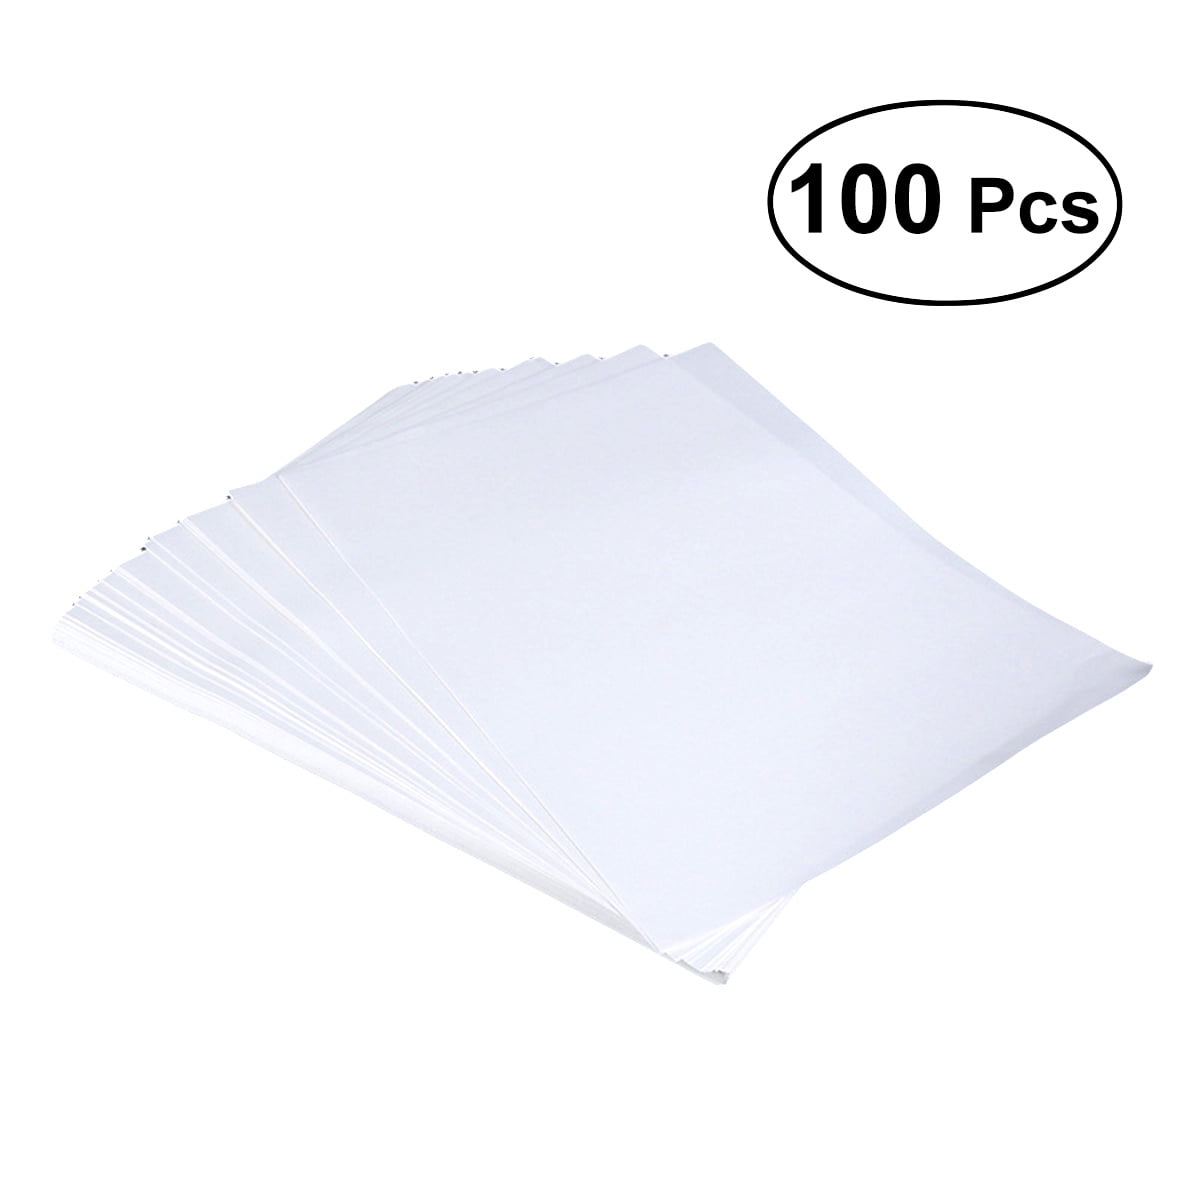 14 Pack Sublimation License Plate Blanks, Thickness 0.65mm Metal